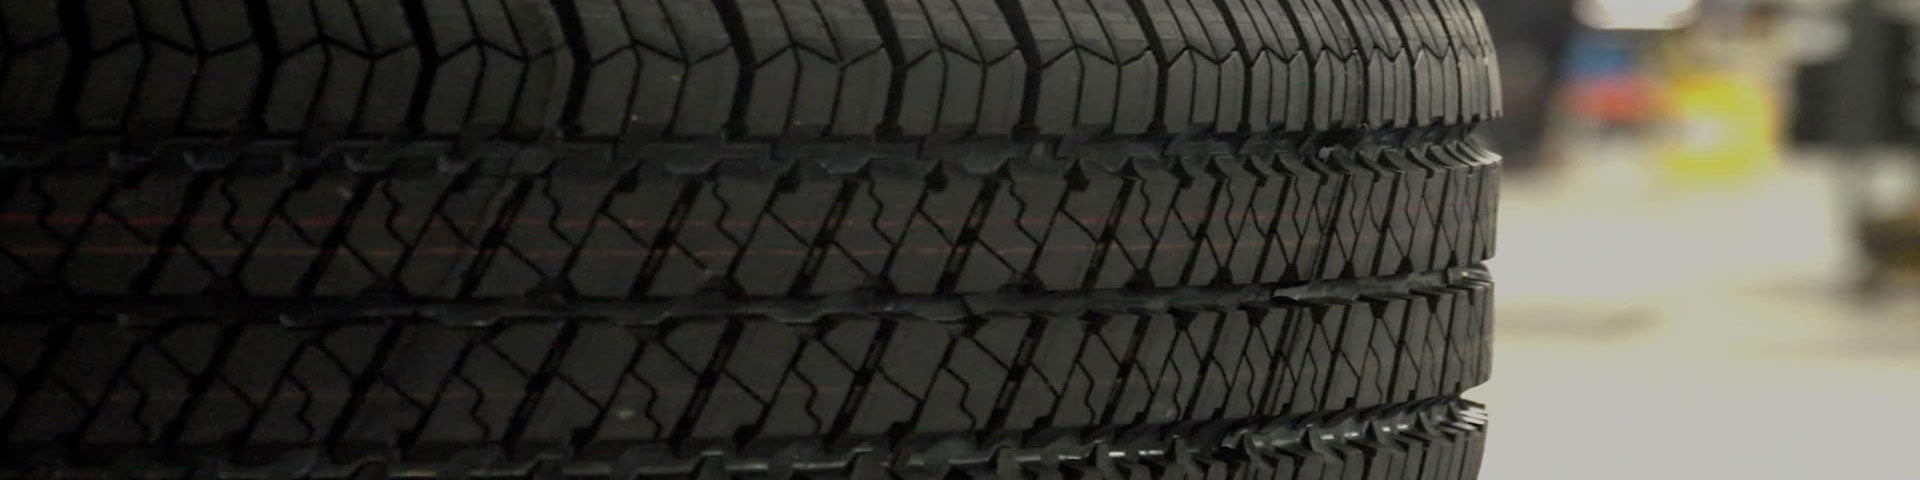 close up view of a tire laid down on it's side